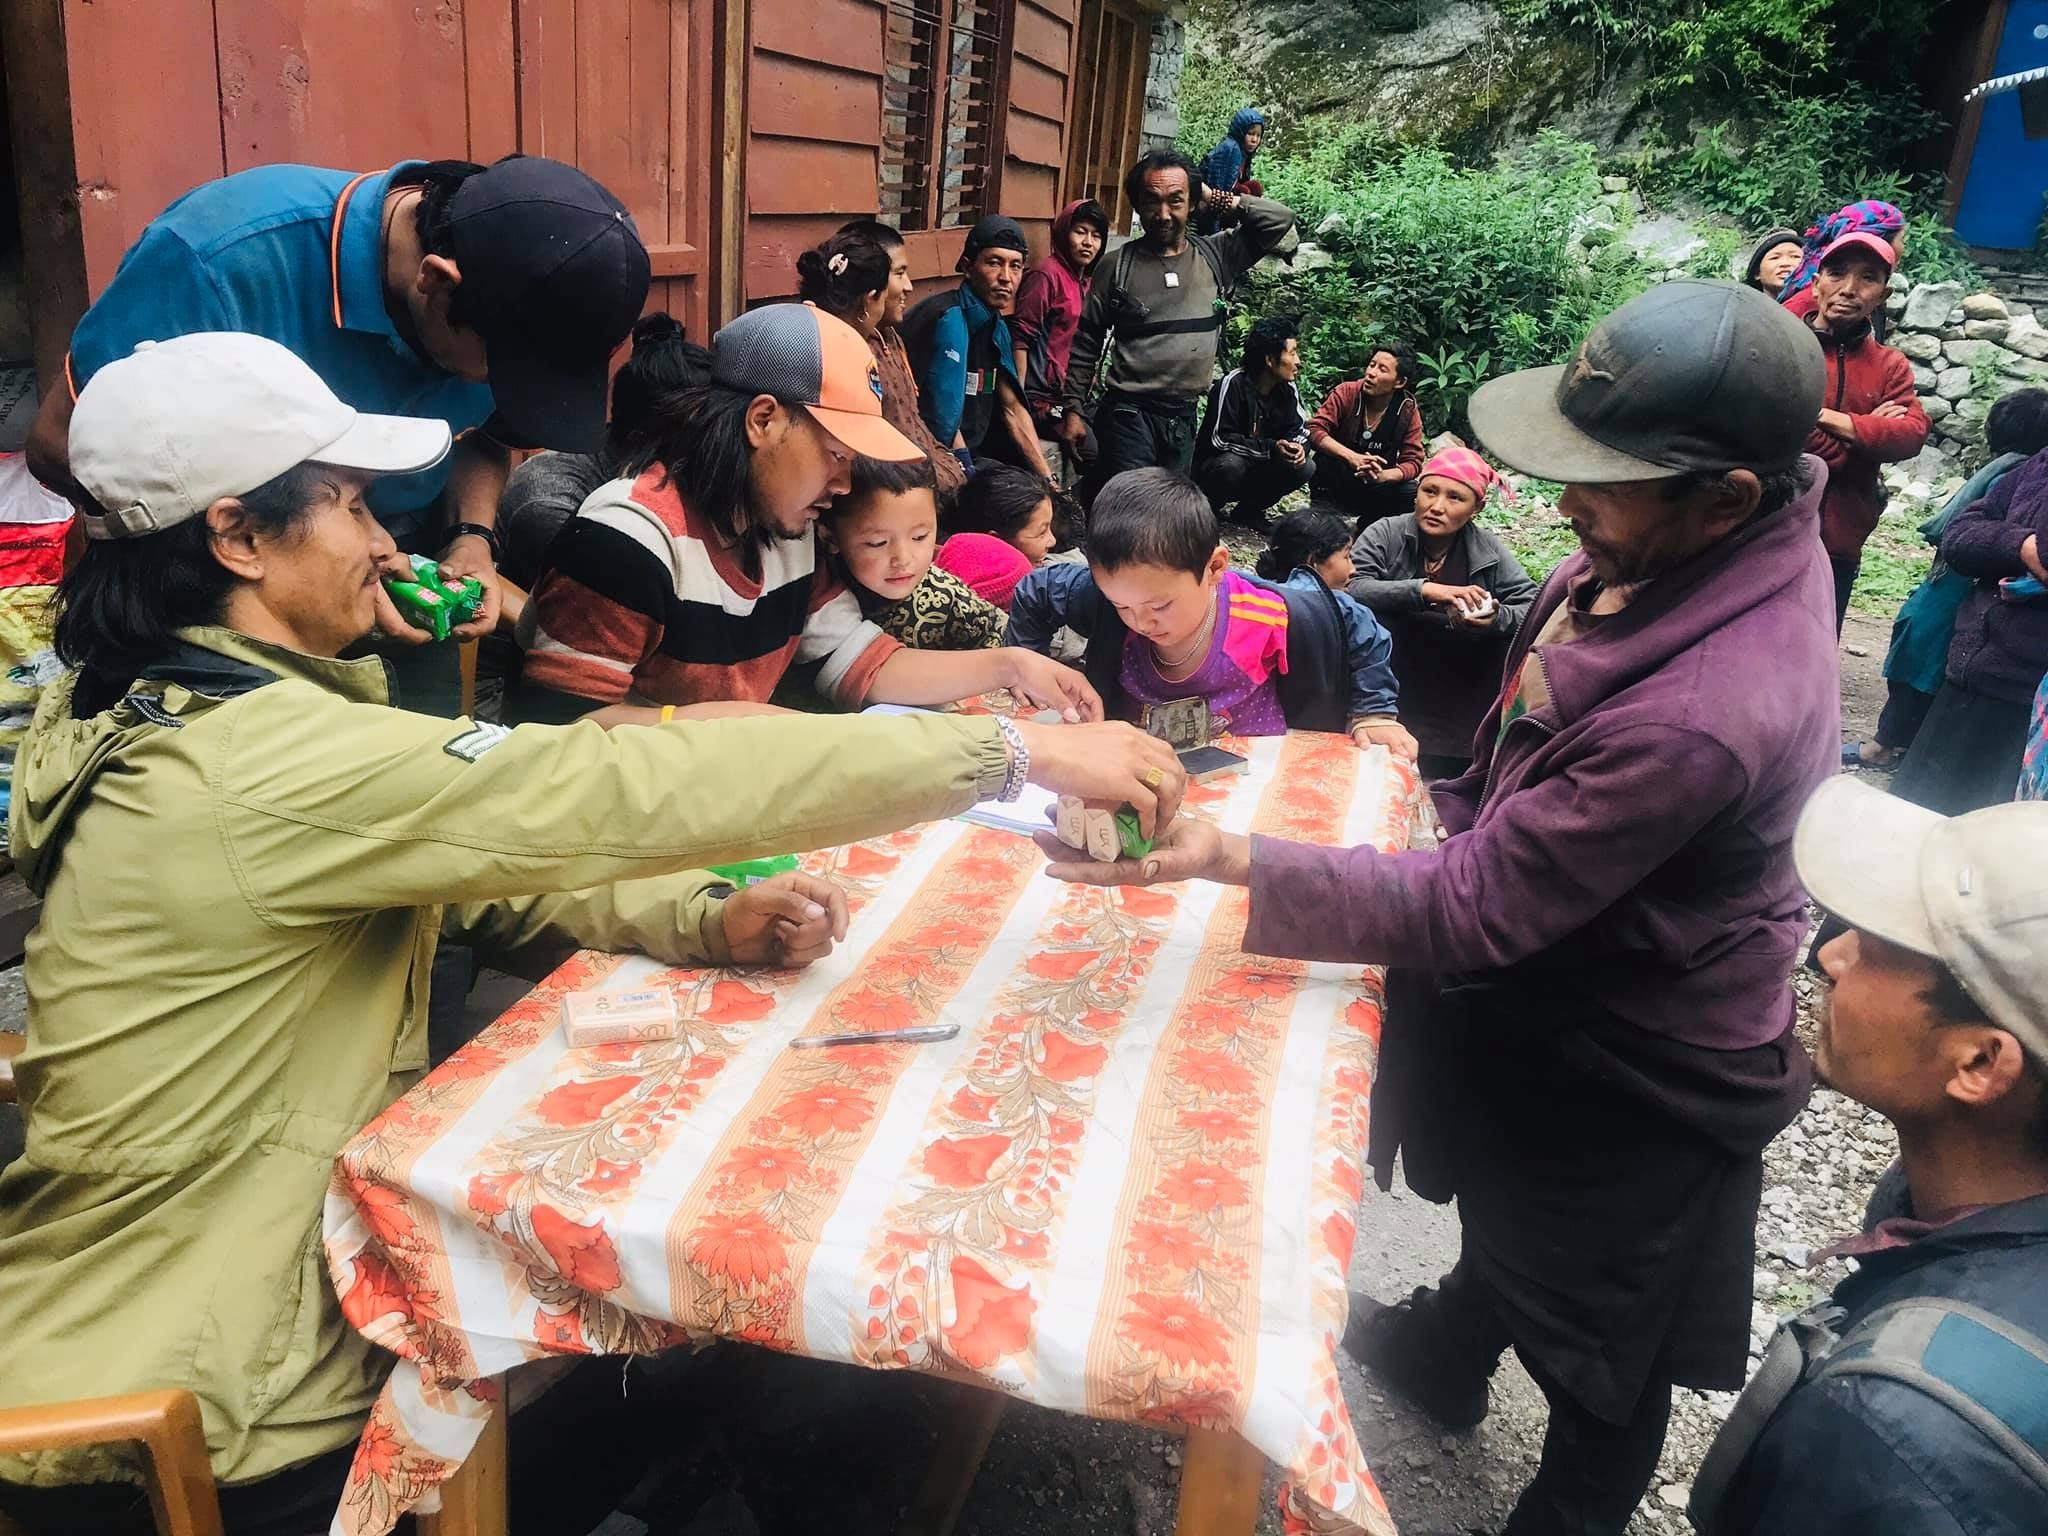 Soap distribution to the villagers of Namrung, Nubri, June 2020. Image by Pema Dhundup. Nepal, 2020.